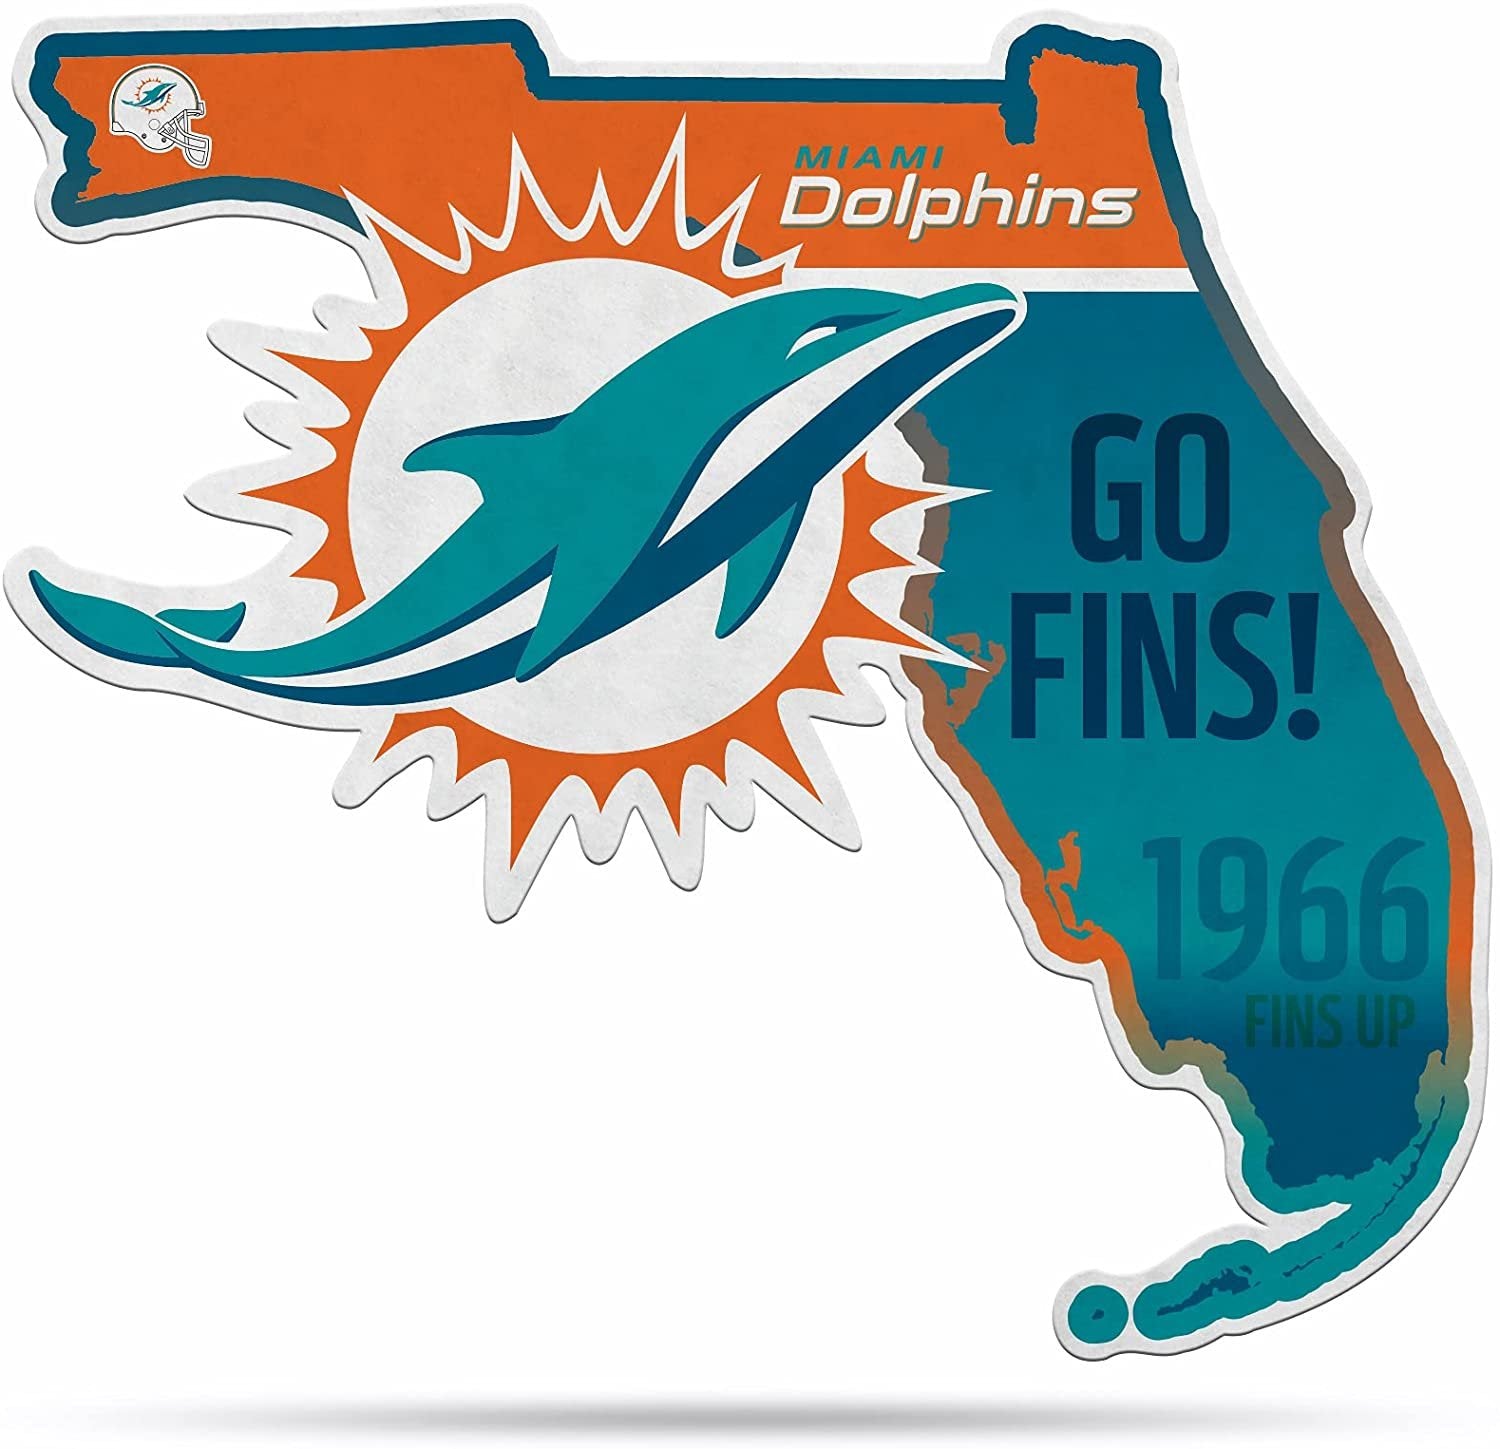 Miami Dolphins Pennant State Shape 18 Inch Soft Felt